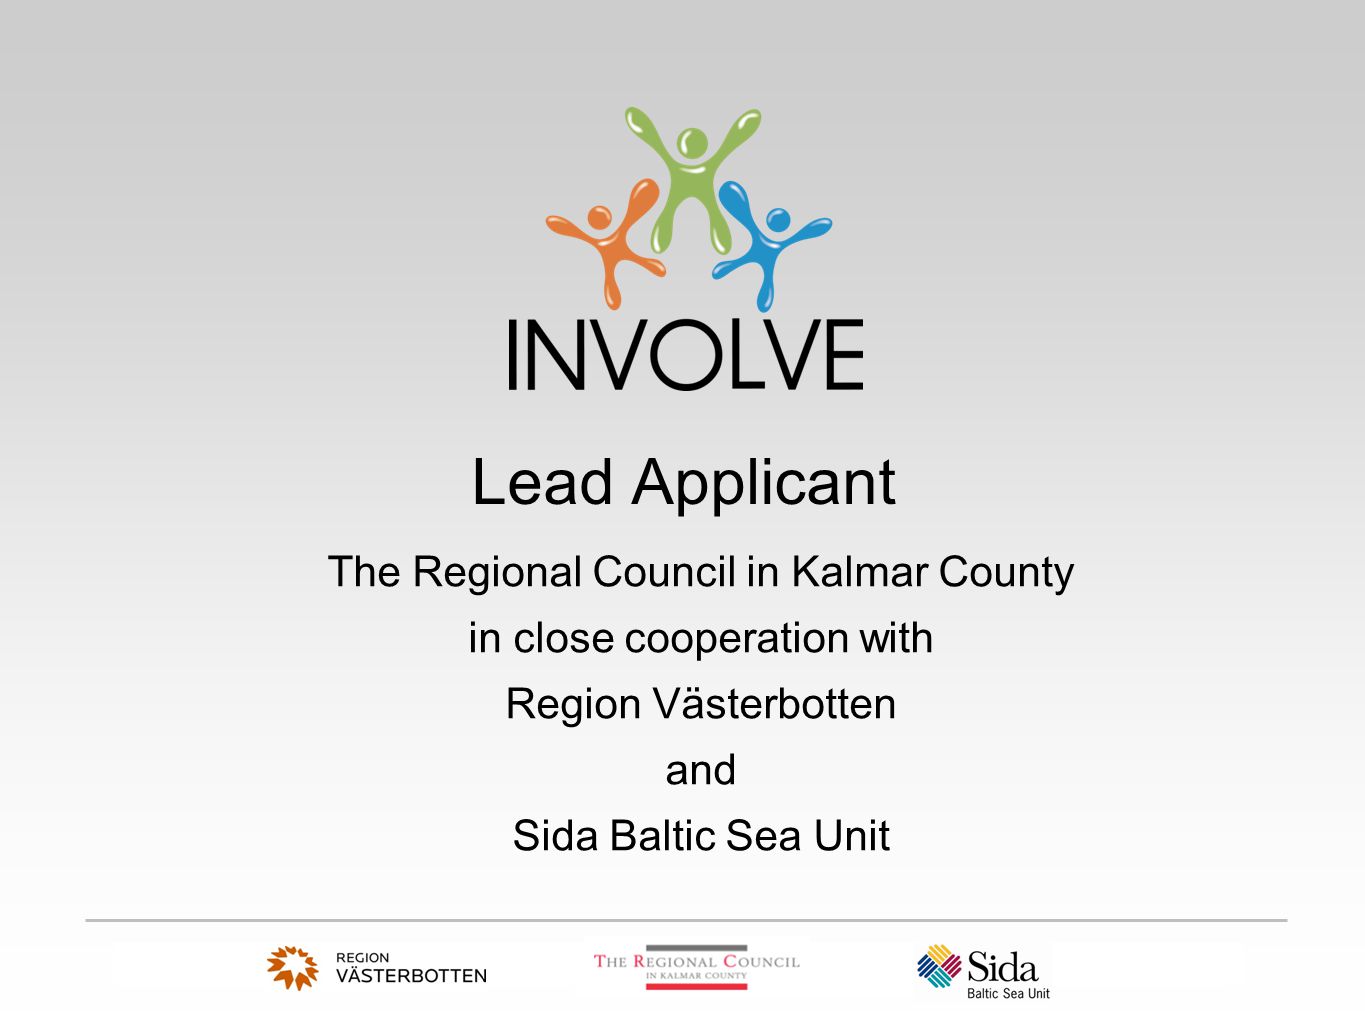 Lead Applicant The Regional Council in Kalmar County in close cooperation with Region Västerbotten and Sida Baltic Sea Unit